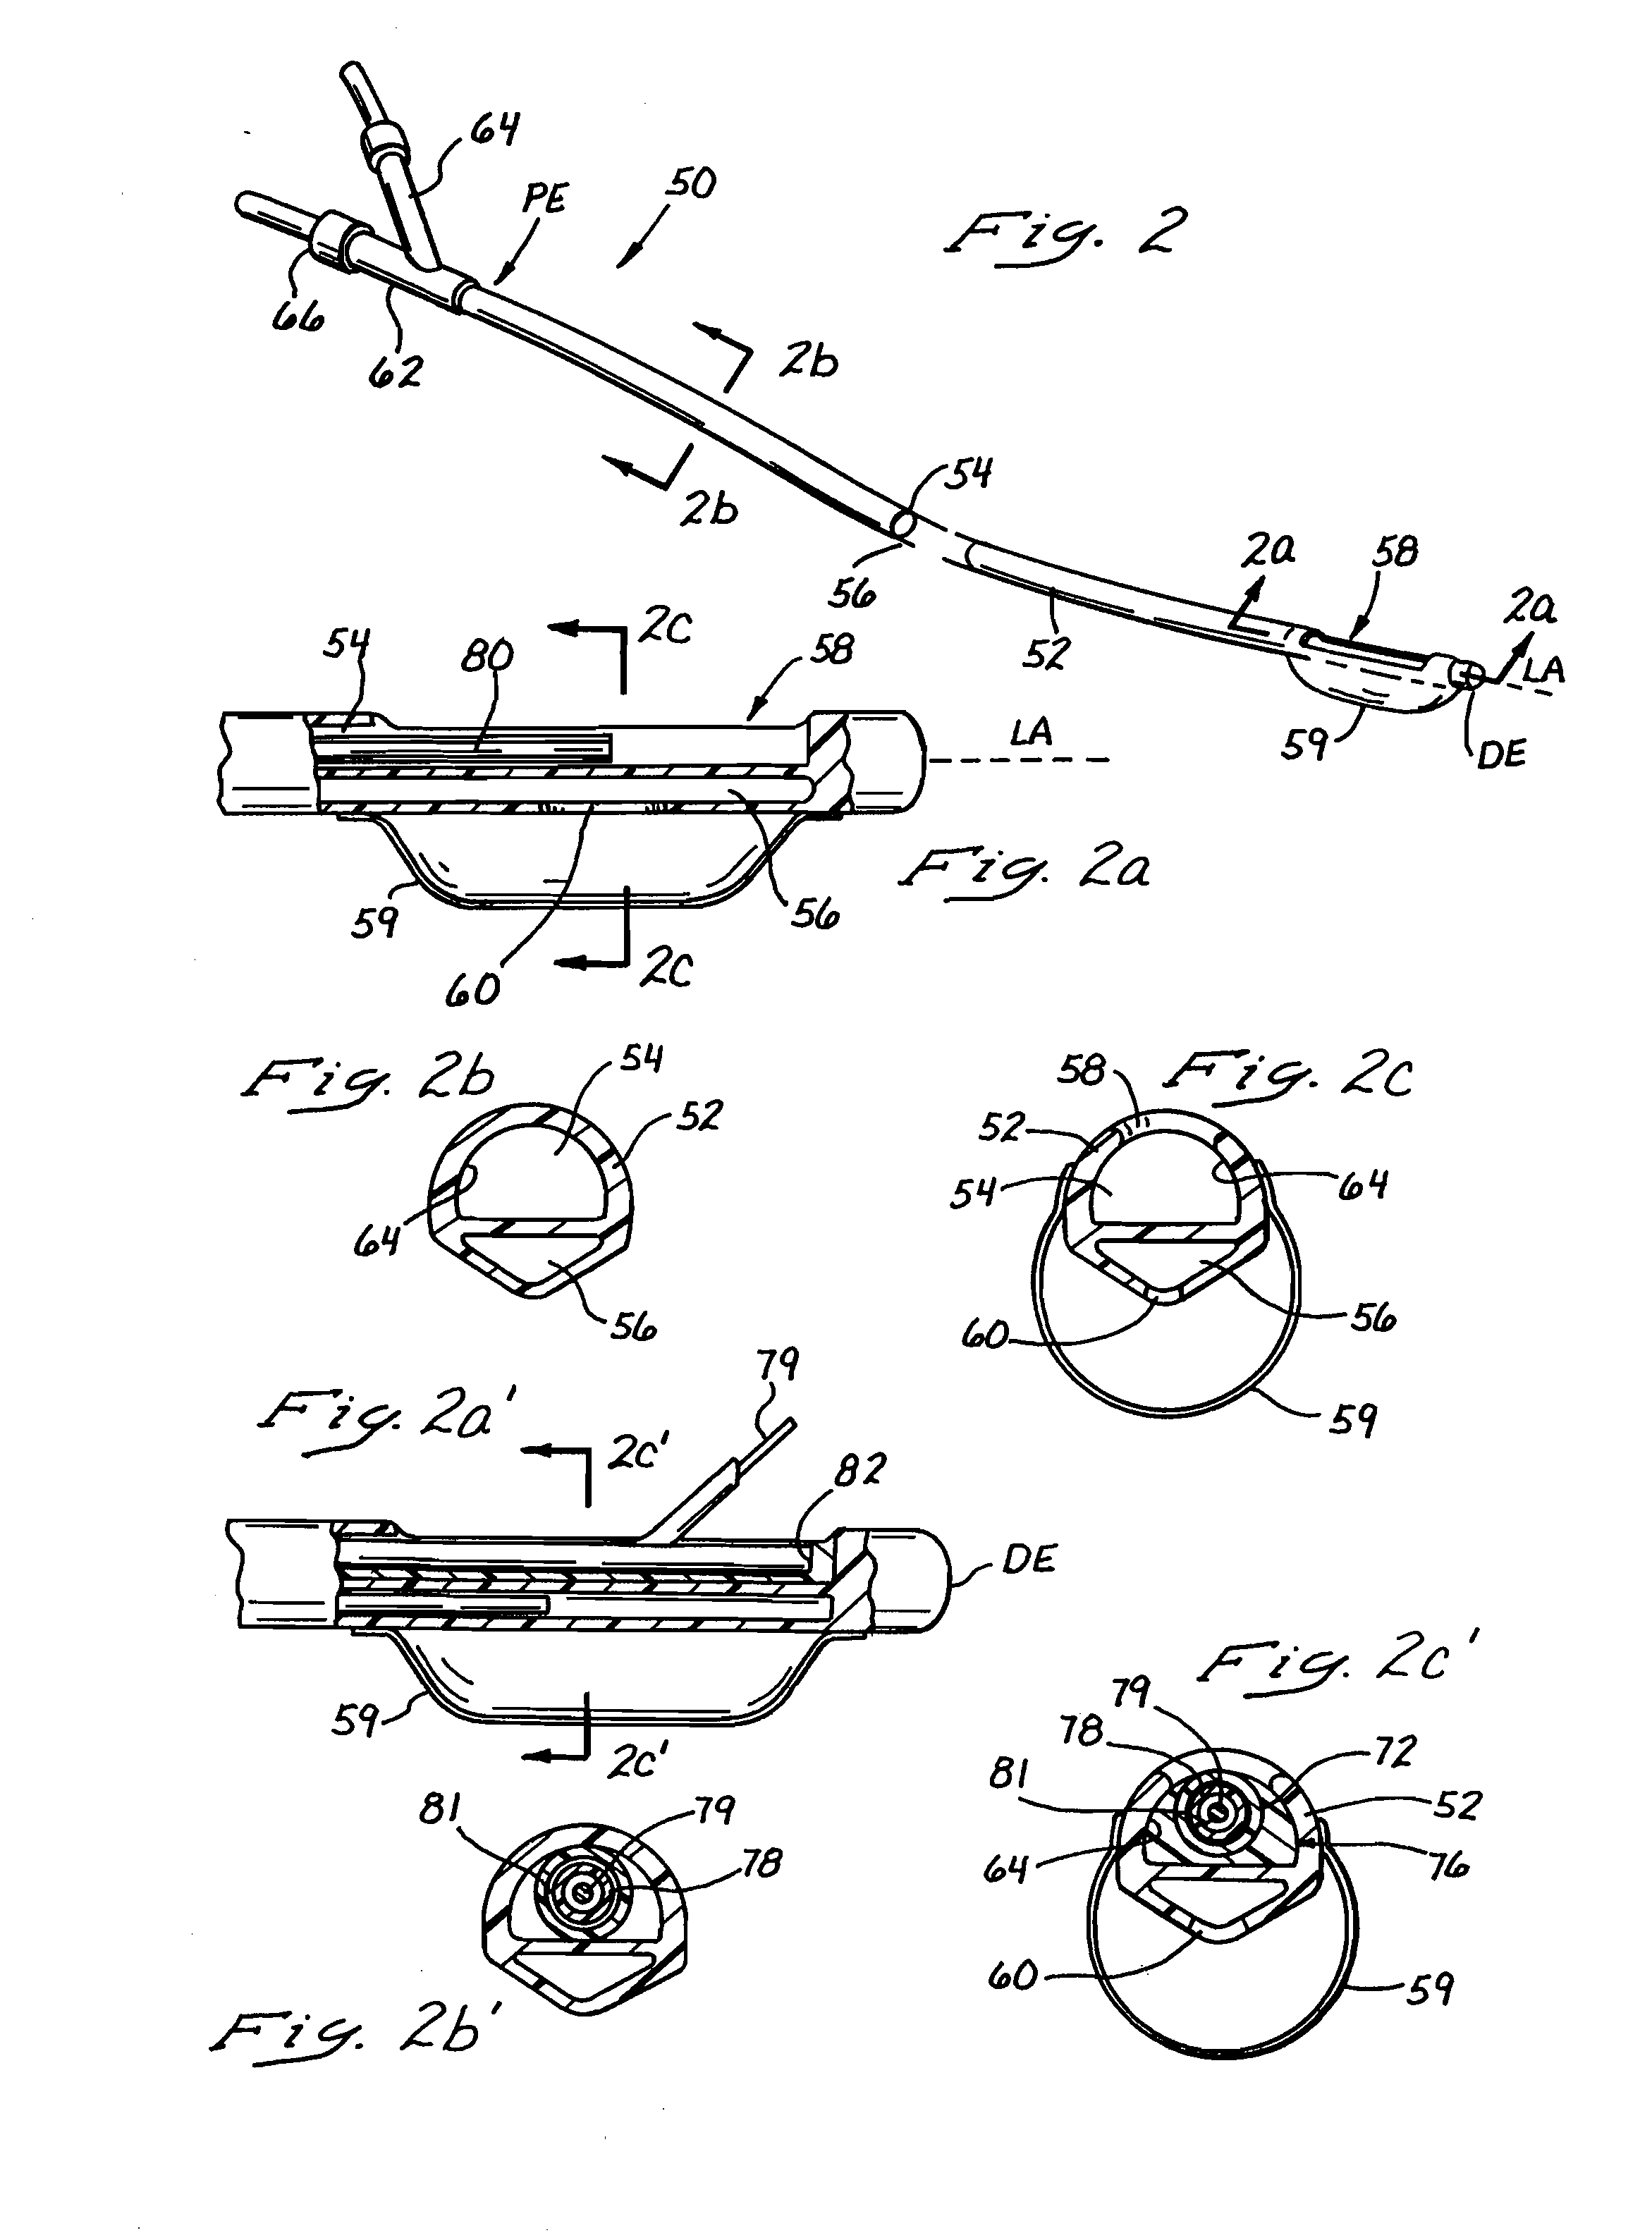 Catheters and Related Devices for Forming Passageways Between Blood Vessels or Other Anatomical Structures